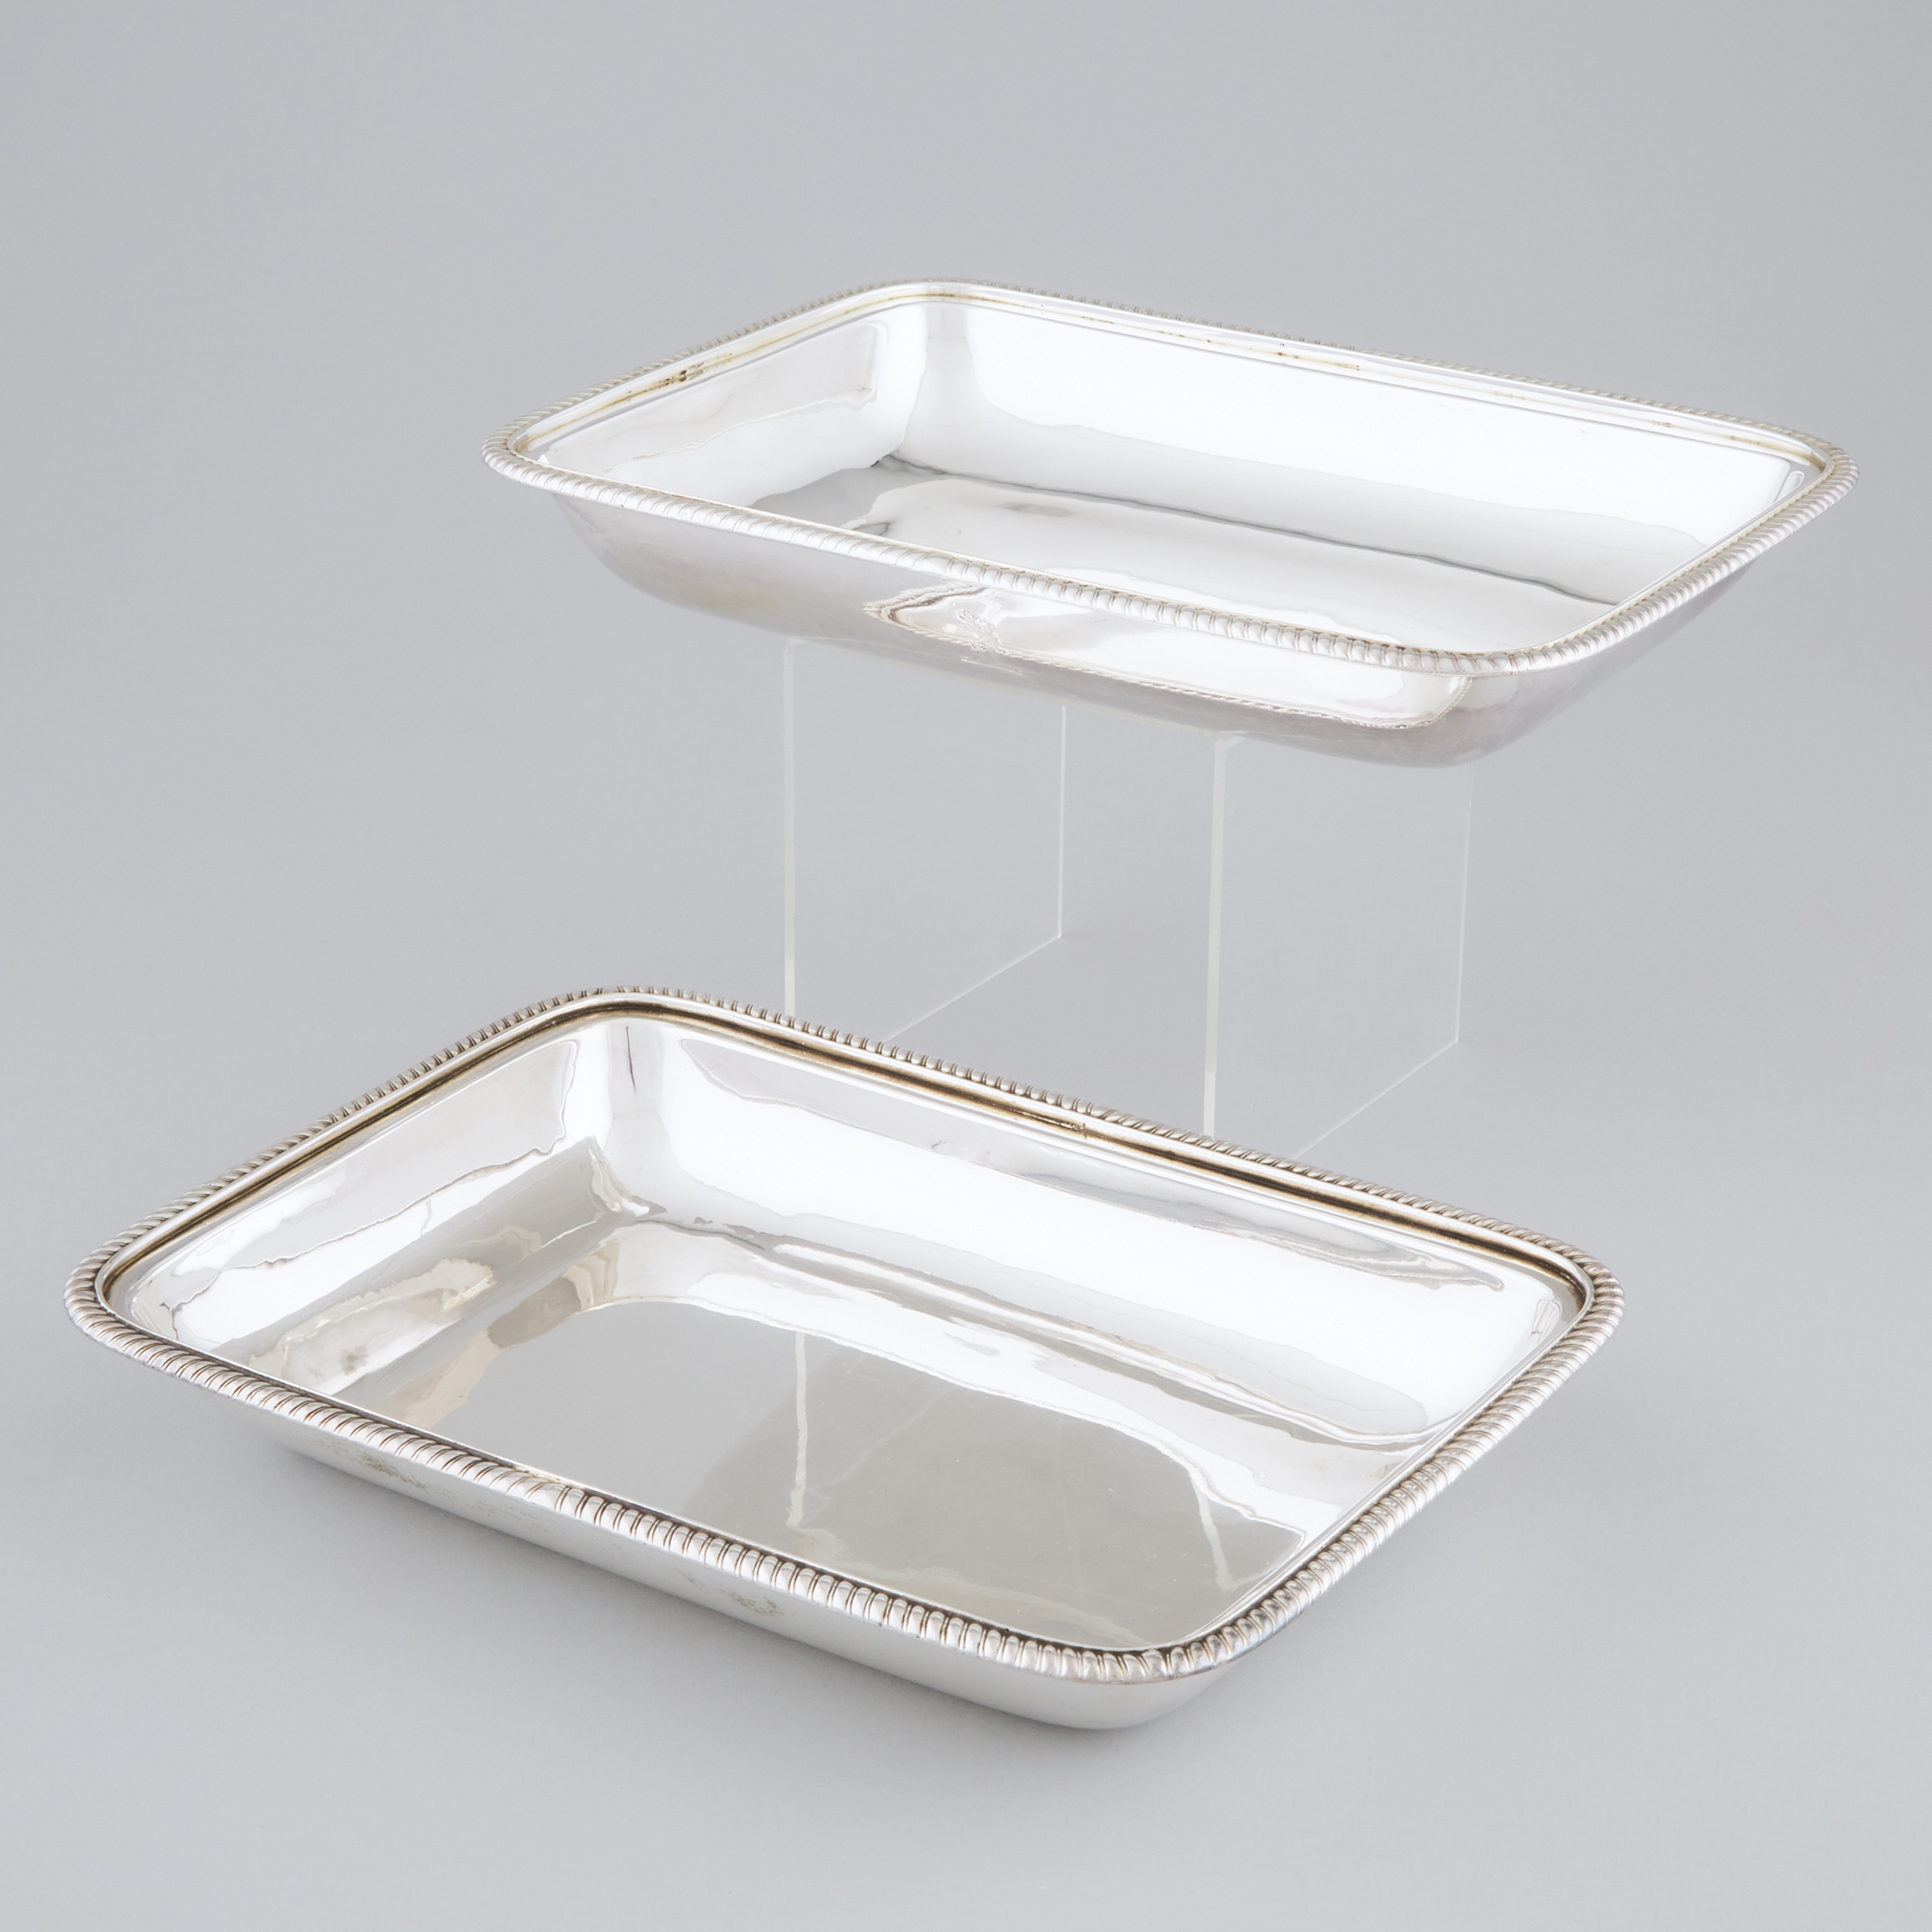 Pair of George III Silver Rectangular Entrée Dishes, Richard Cook, London, 1805